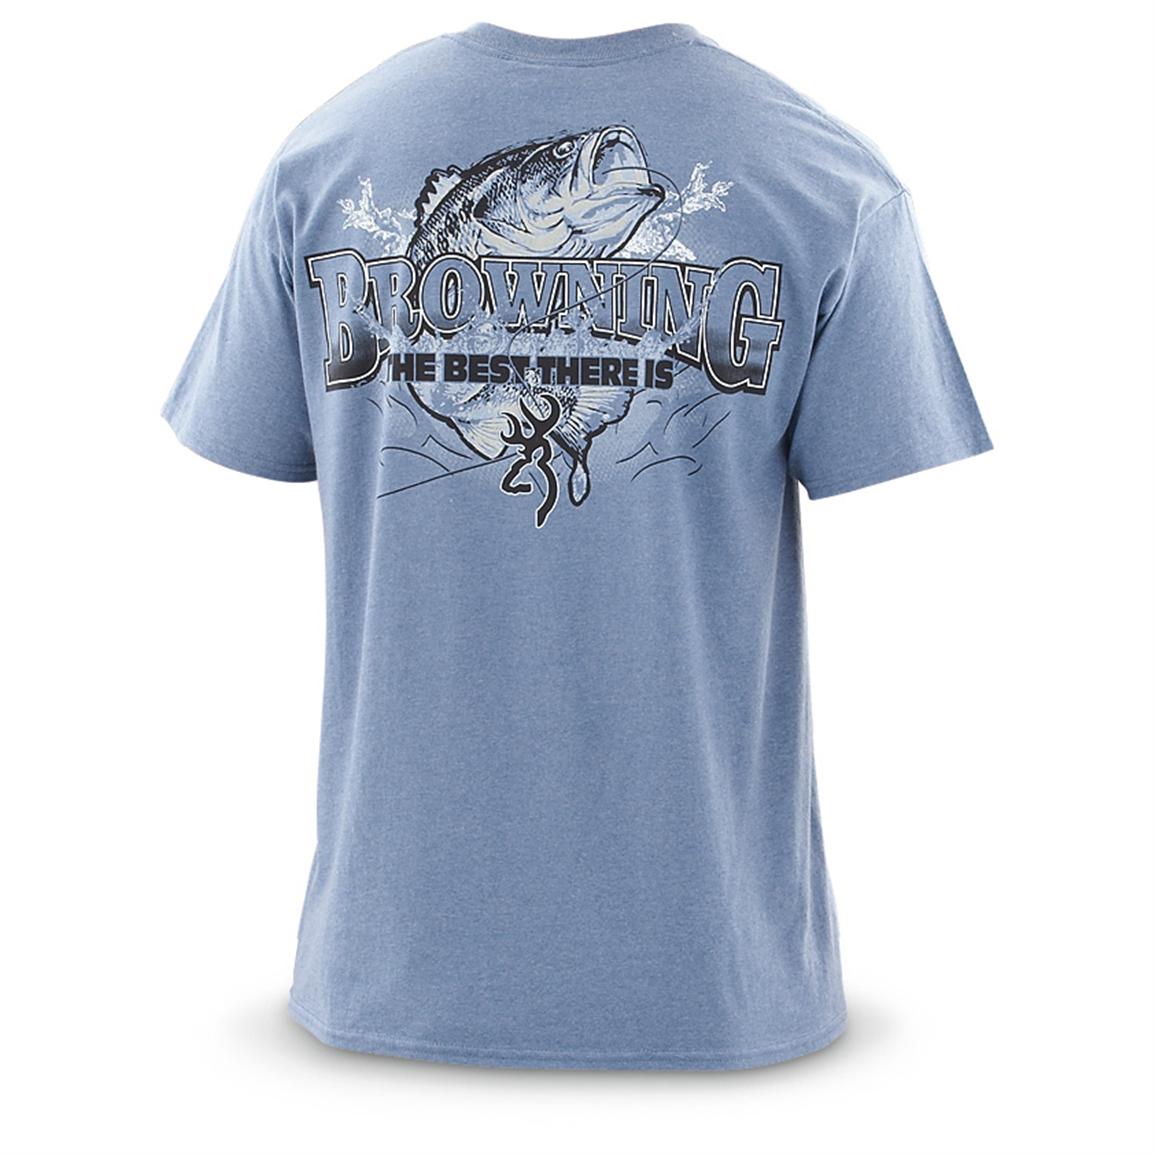 Browning® Graphic T-shirt - 420873, T-Shirts at Sportsman's Guide